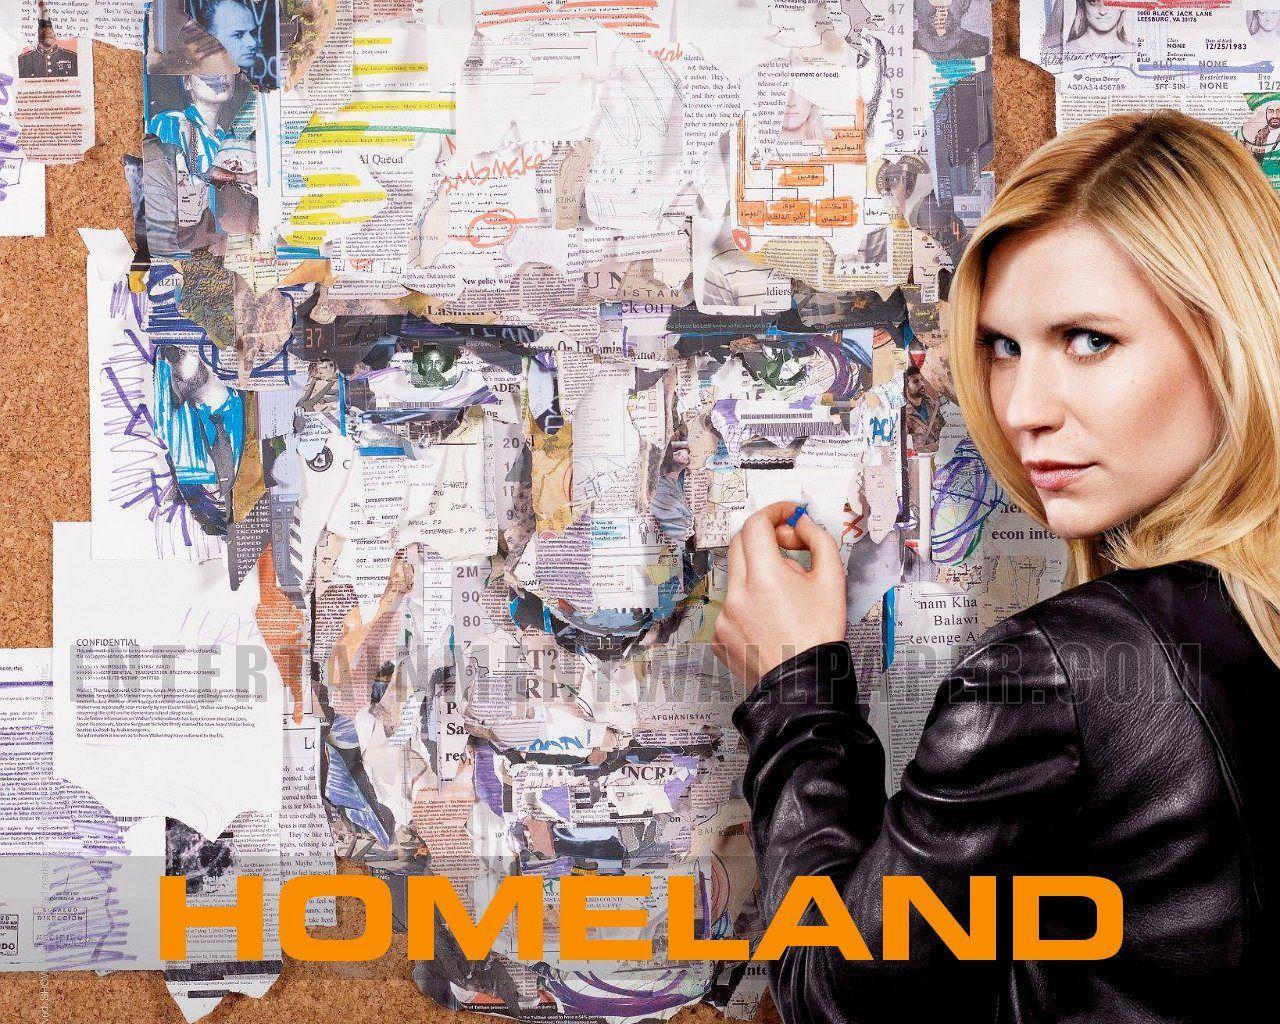 Homeland Pictures to Pin